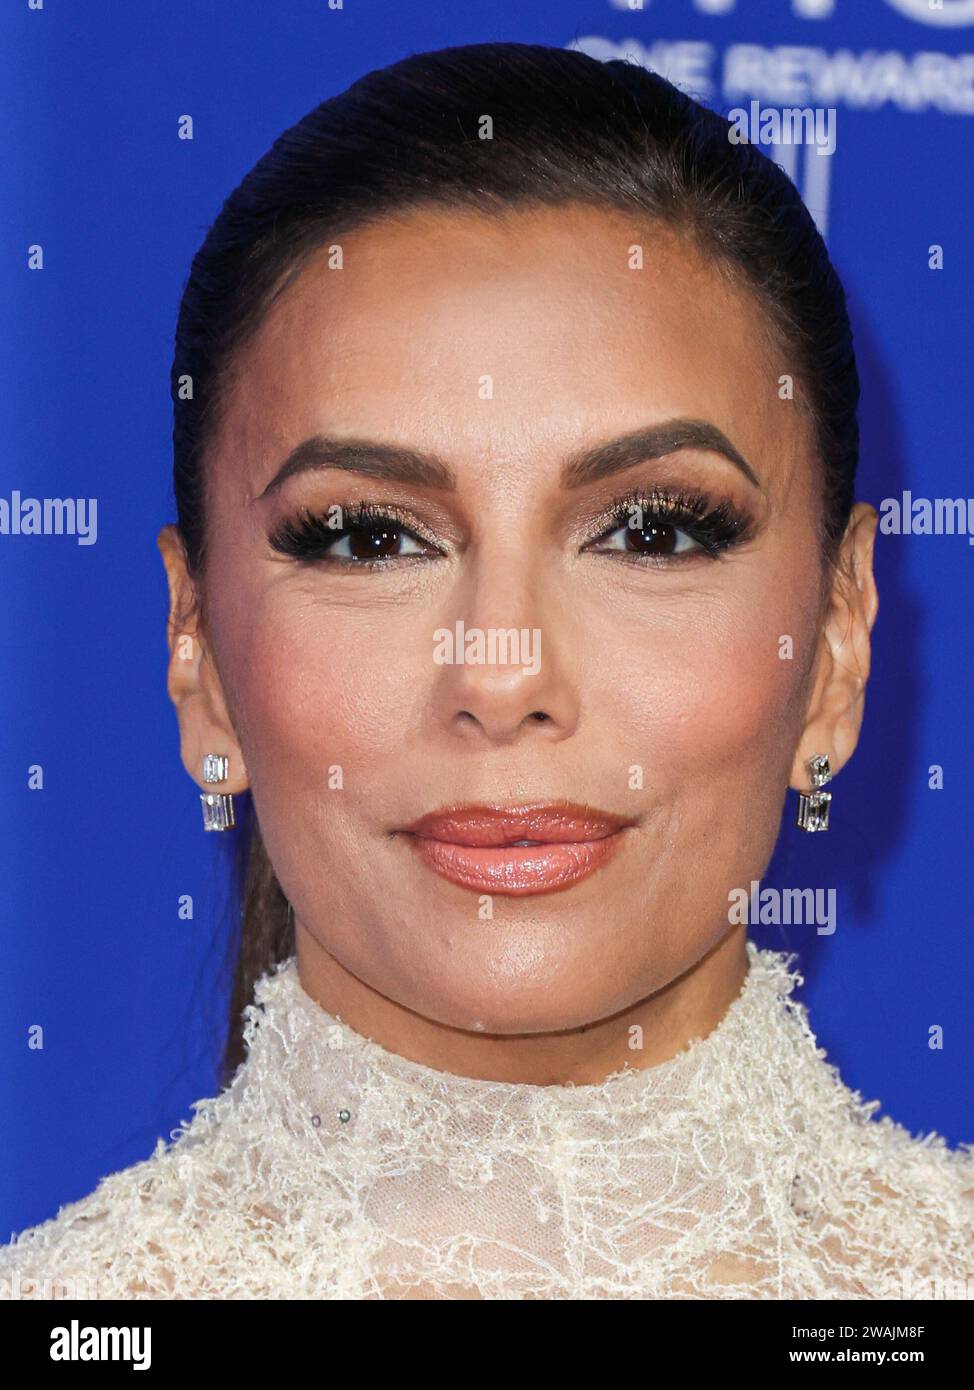 PALM SPRINGS, RIVERSIDE COUNTY, CALIFORNIA, USA - JANUARY 04: Eva Longoria arrives at the 35th Annual Palm Springs International Film Festival Film Awards held at the Palm Springs Convention Center on January 4, 2024 in Palm Springs, Riverside County, California, United States. (Photo by Xavier Collin/Image Press Agency) Stock Photo